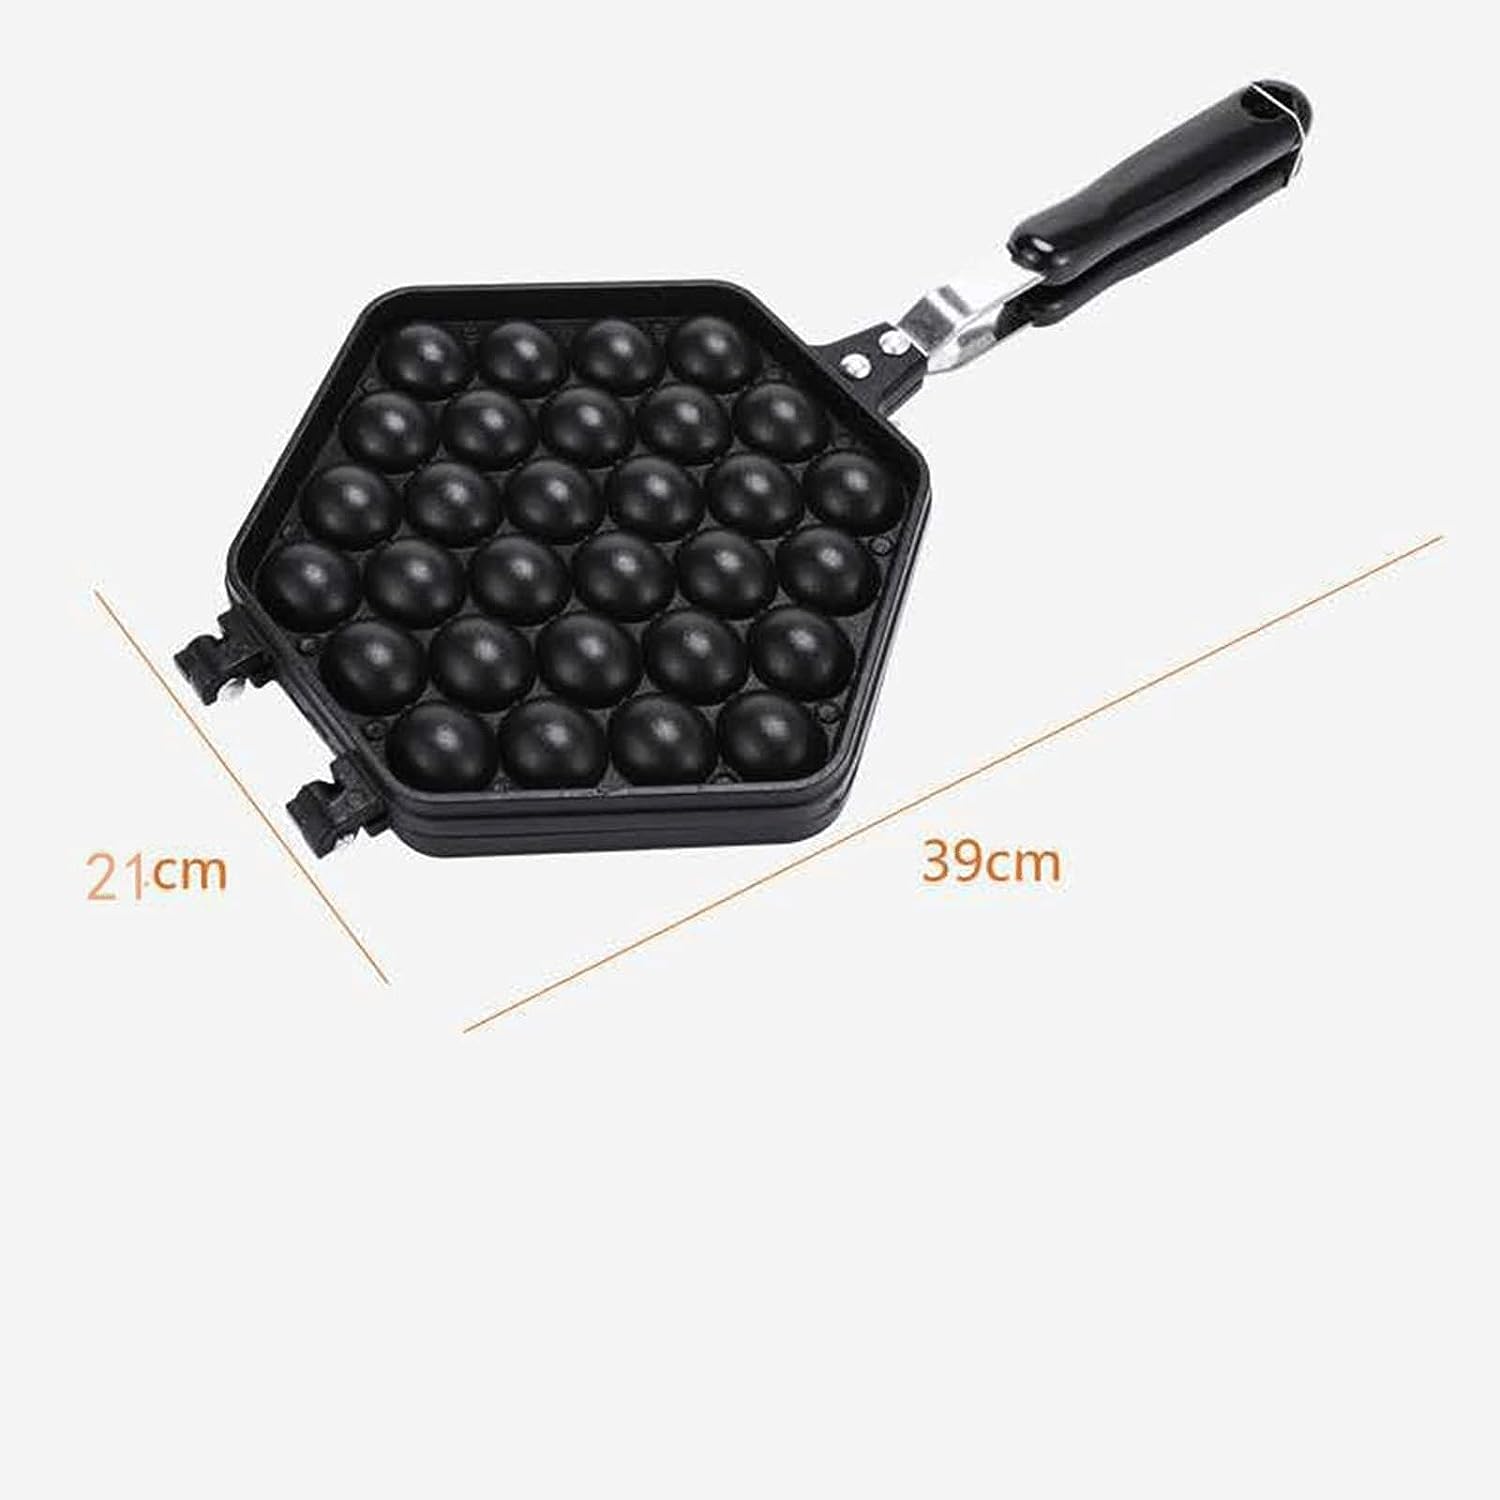 Non-stick Egg Puffs Maker Pan with its size